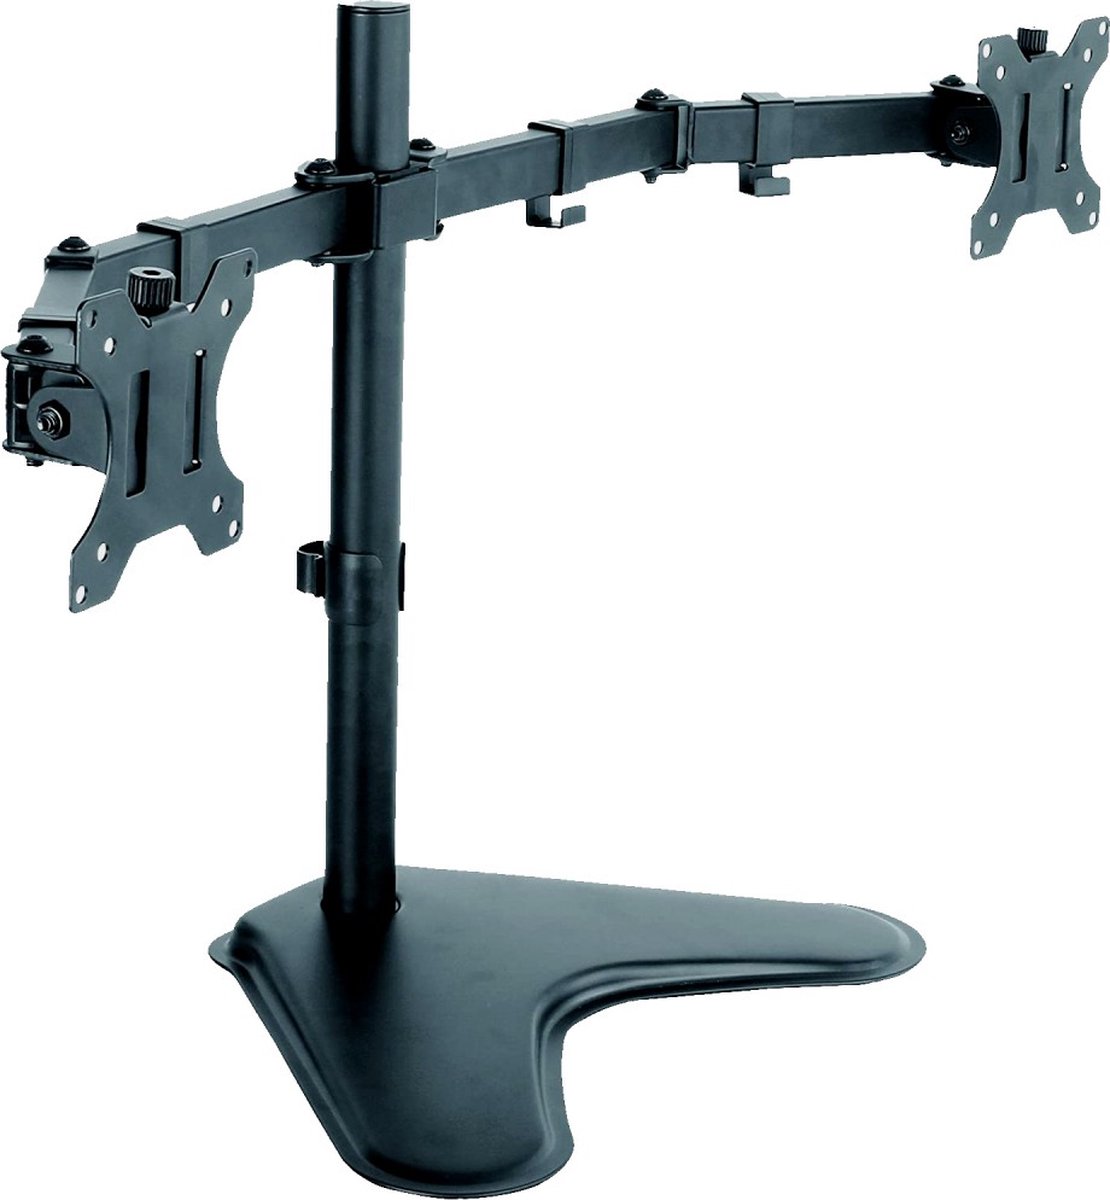 Techly ICA-LCD 2524, Schroeven, 16 kg, 33 cm (13